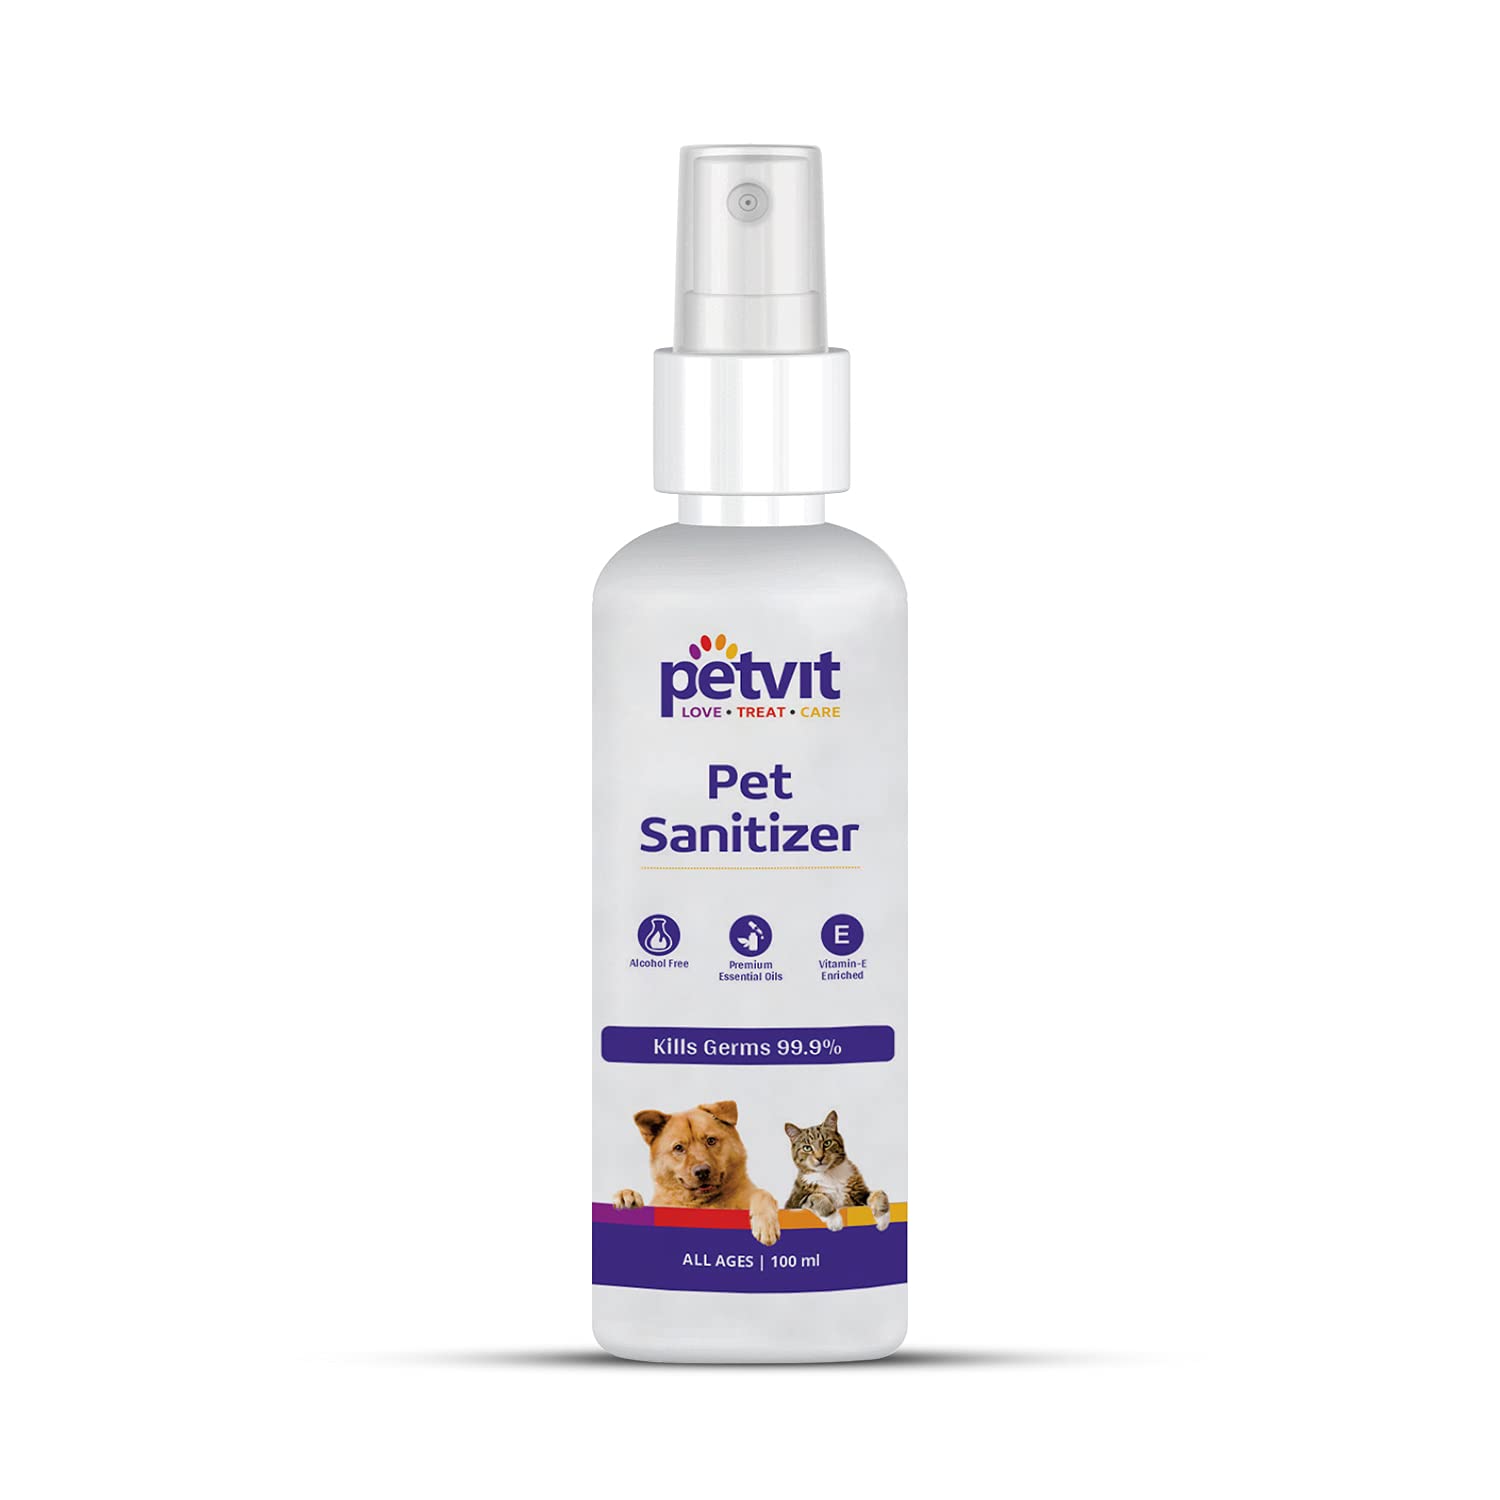 Petvit Pet Sanitizer with Citronella Oil, Neem Oil, Eucalyptus Oil, Vitamin E Oil Kills 99.9% Germs, Anti-Microbial, No Alcohol, Vet Approved, Hypoallergenic for All Breed Dog & Cat-100ml, White